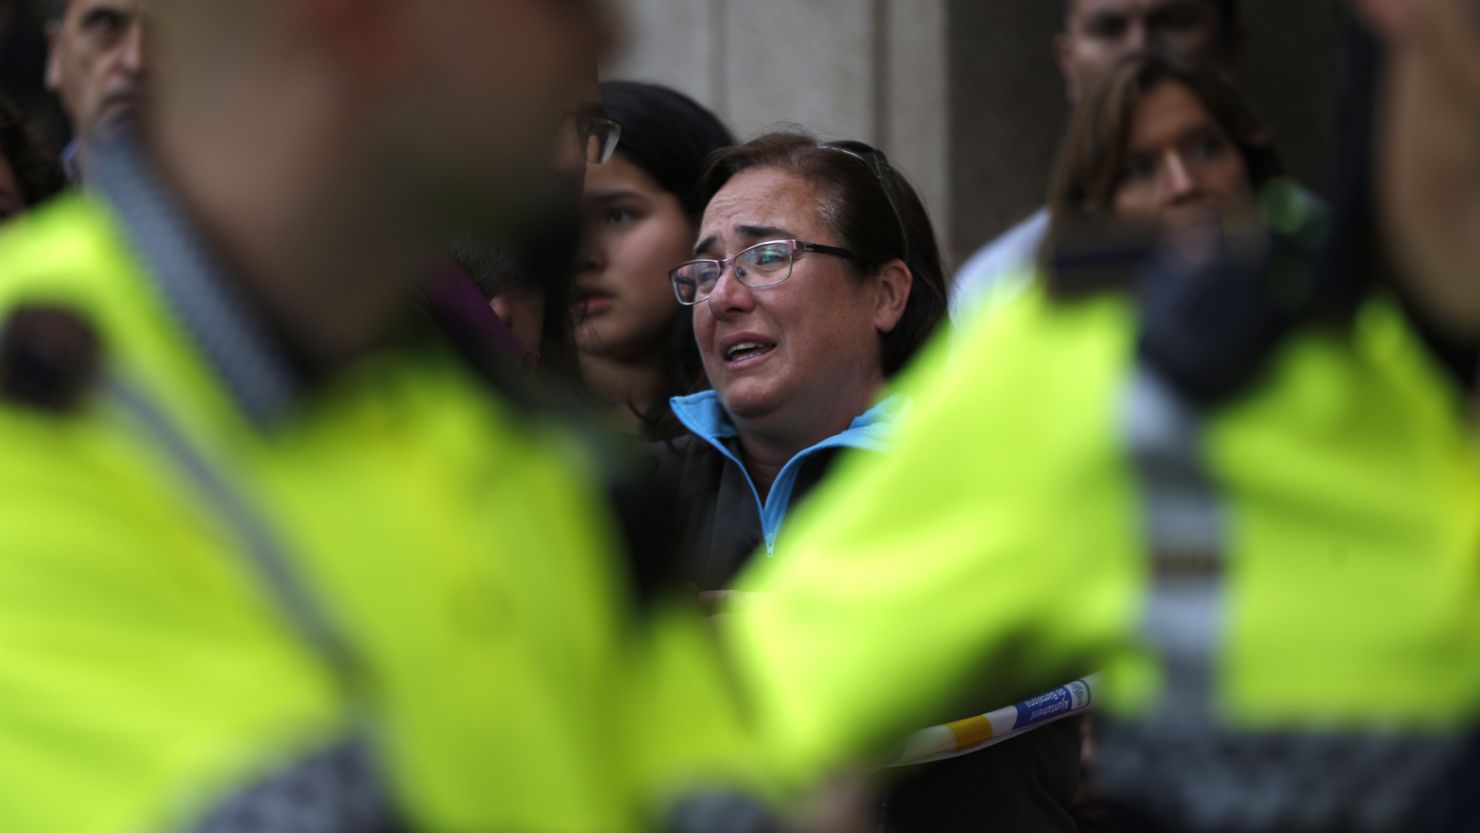 A woman reacts outside a high school in Barcelona after a teacher was killed.